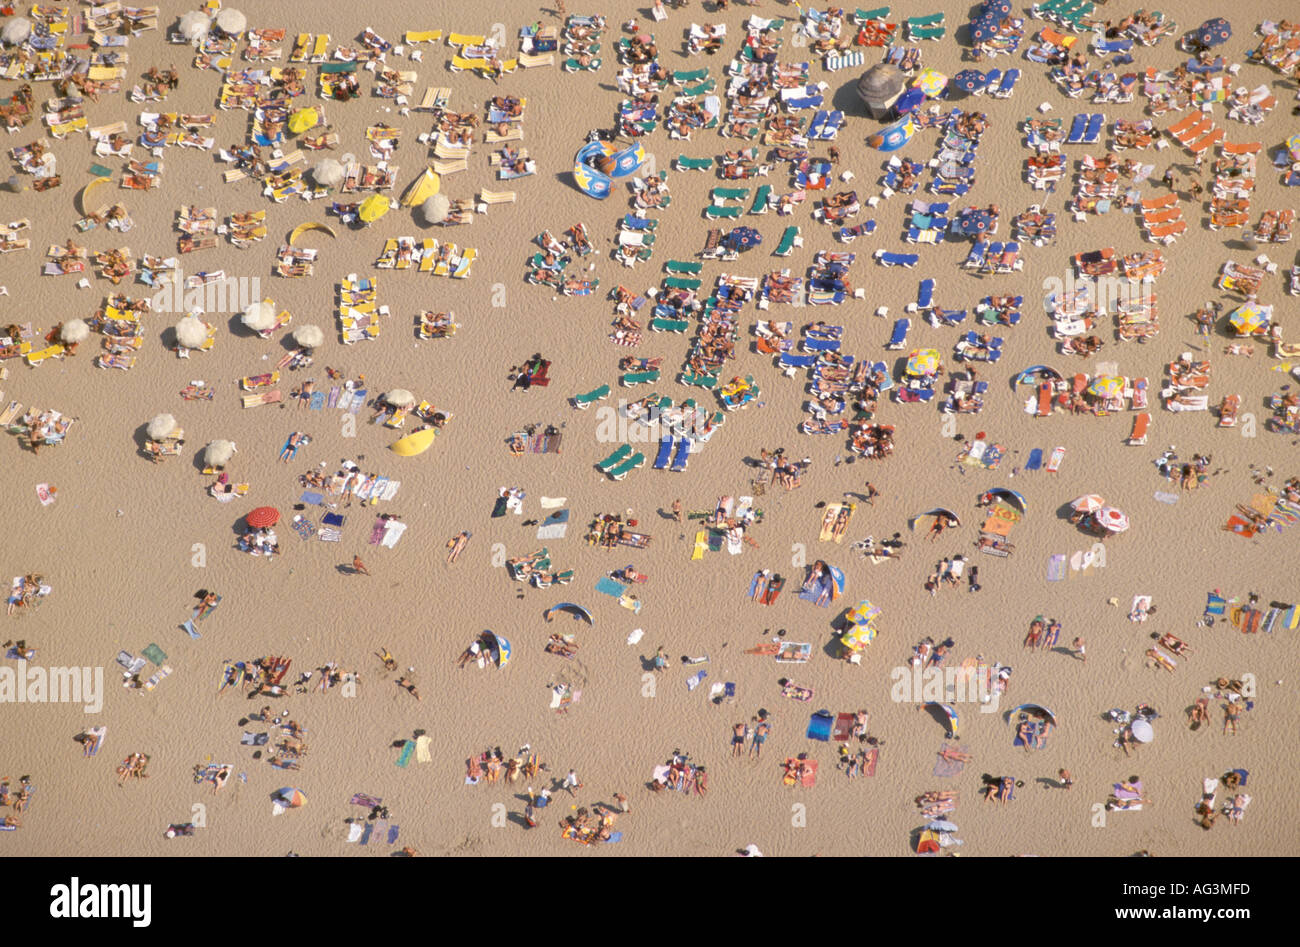 Arial view of a crowd of people on the beach Stock Photo